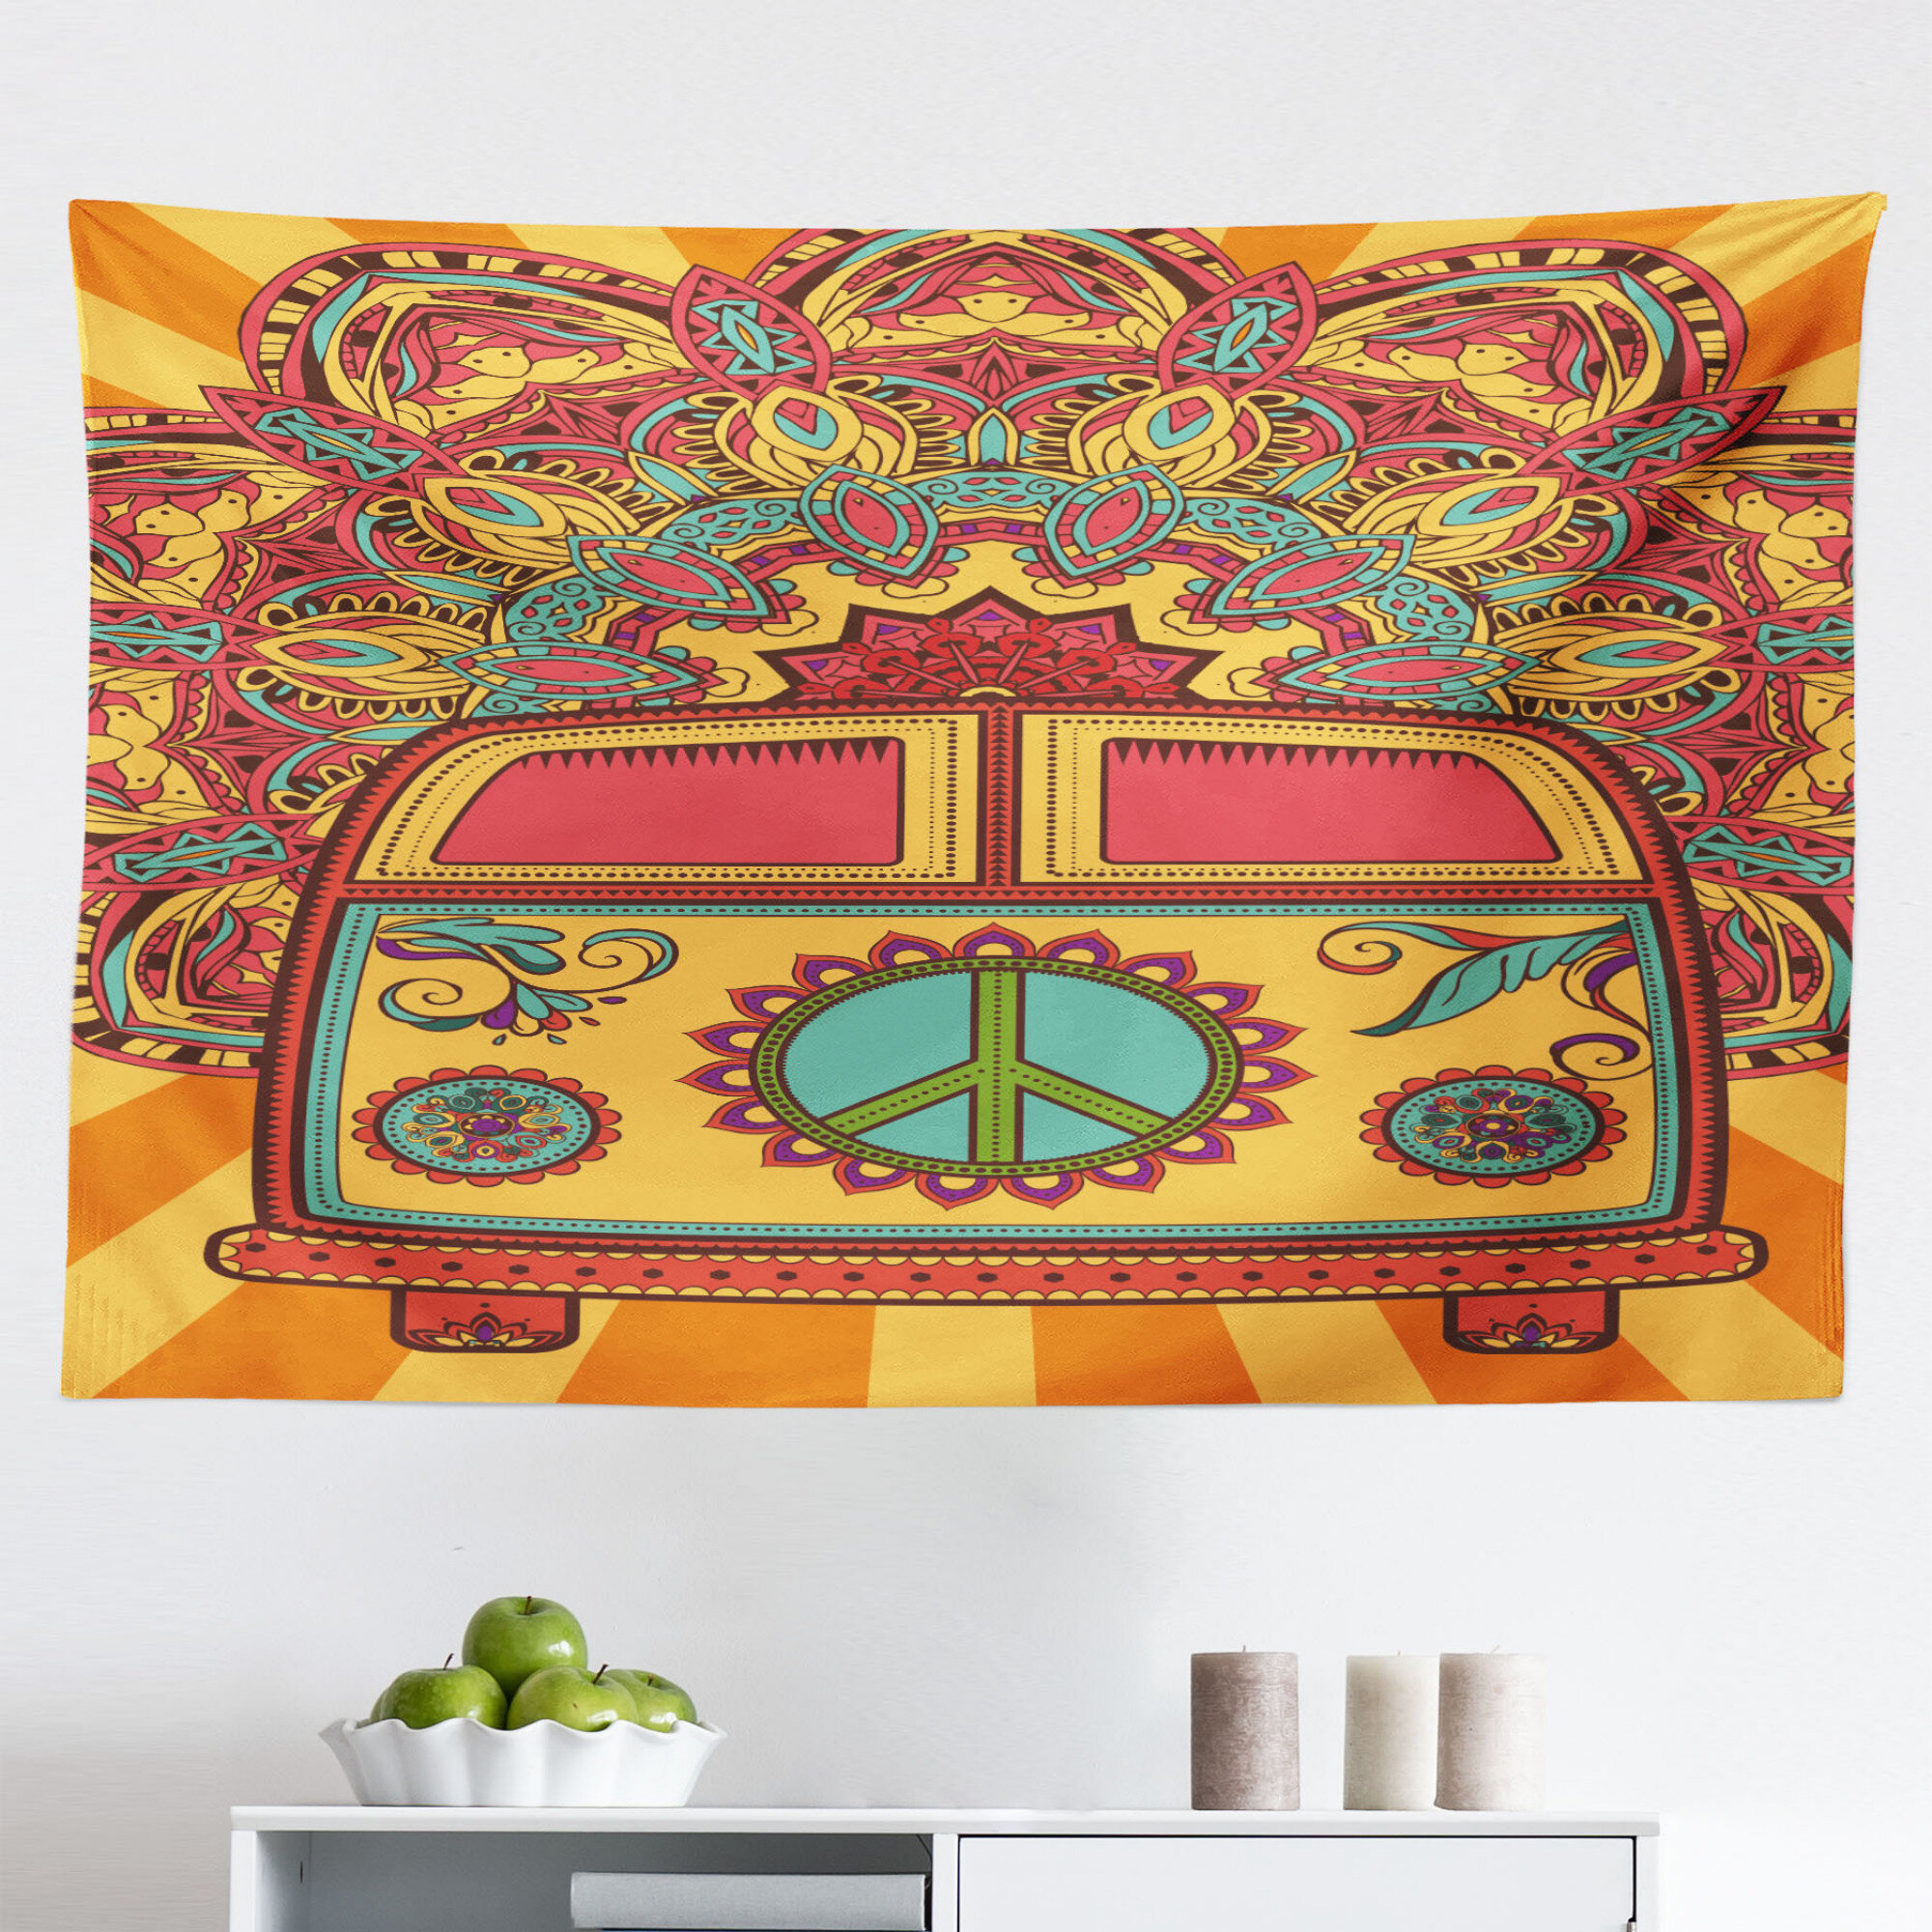 40"x45" Tie-Dye Peace Bus Cloth Tapestry New 